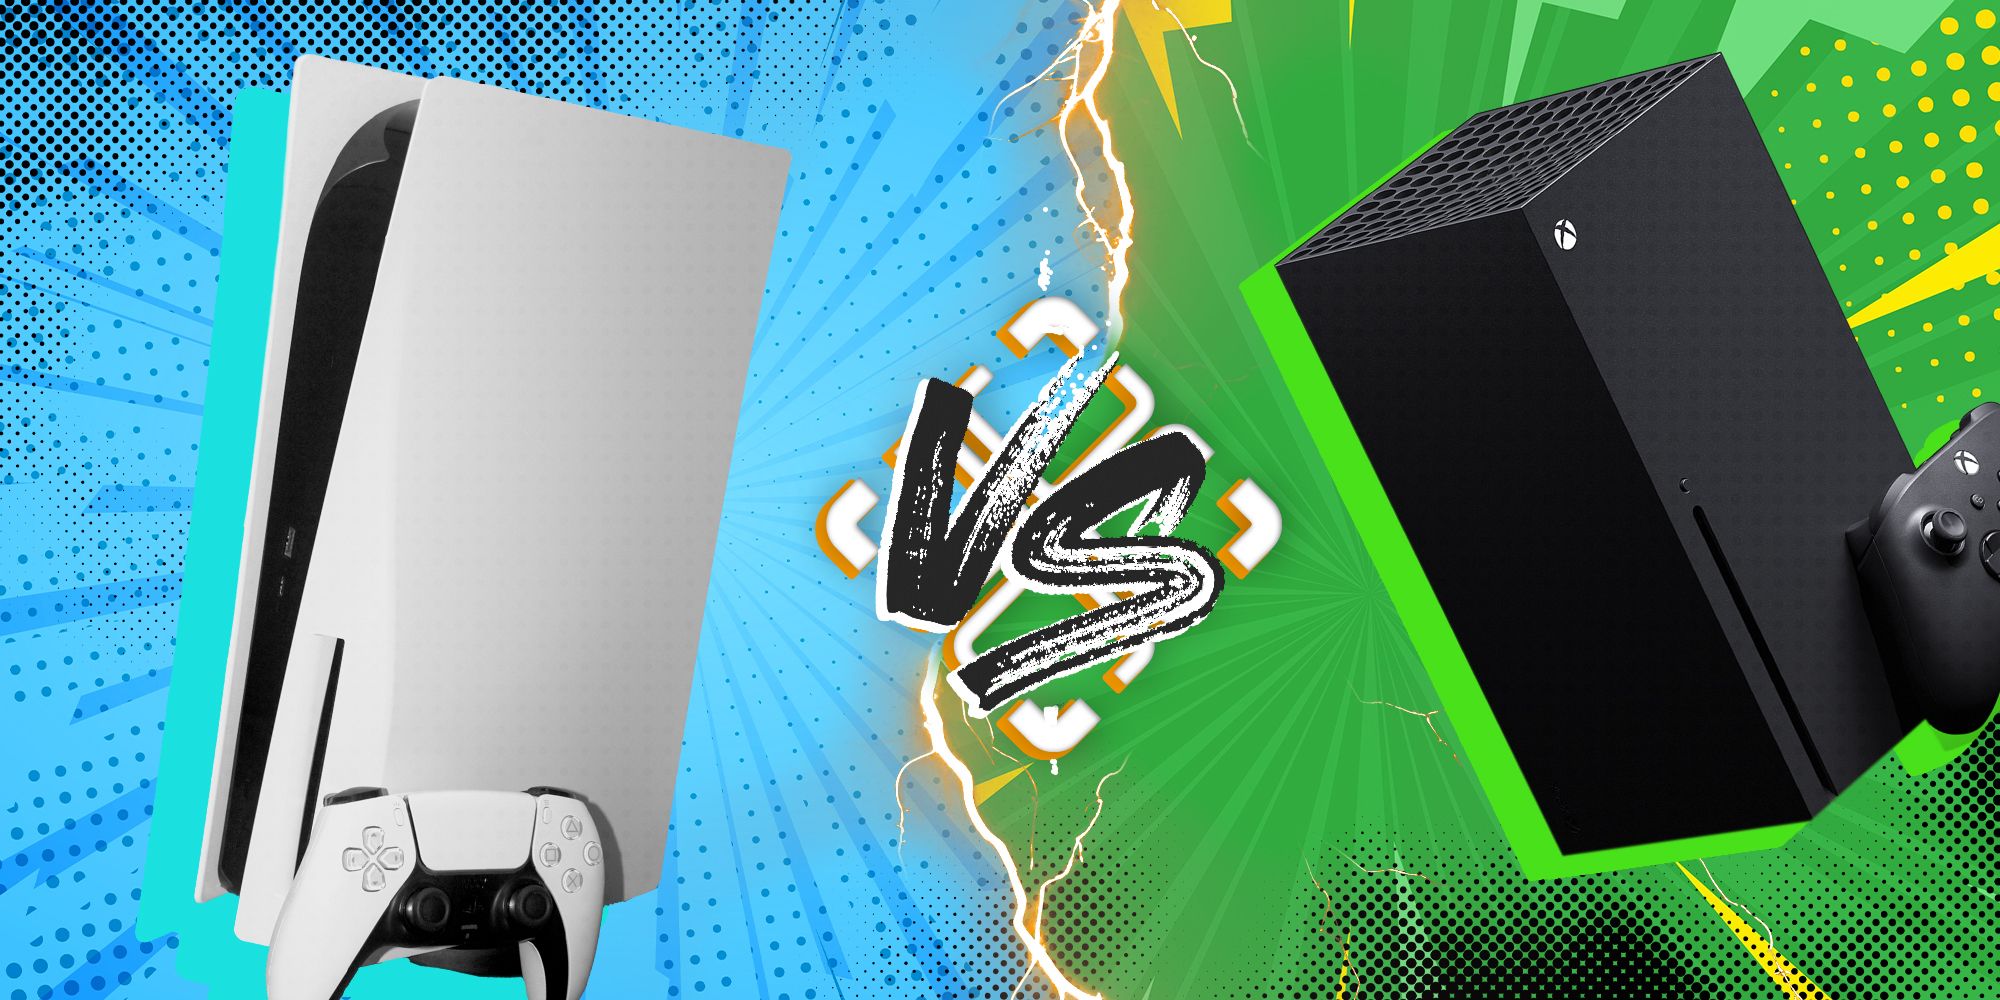 PS5 Vs. Xbox Series X: Which Should You Buy?